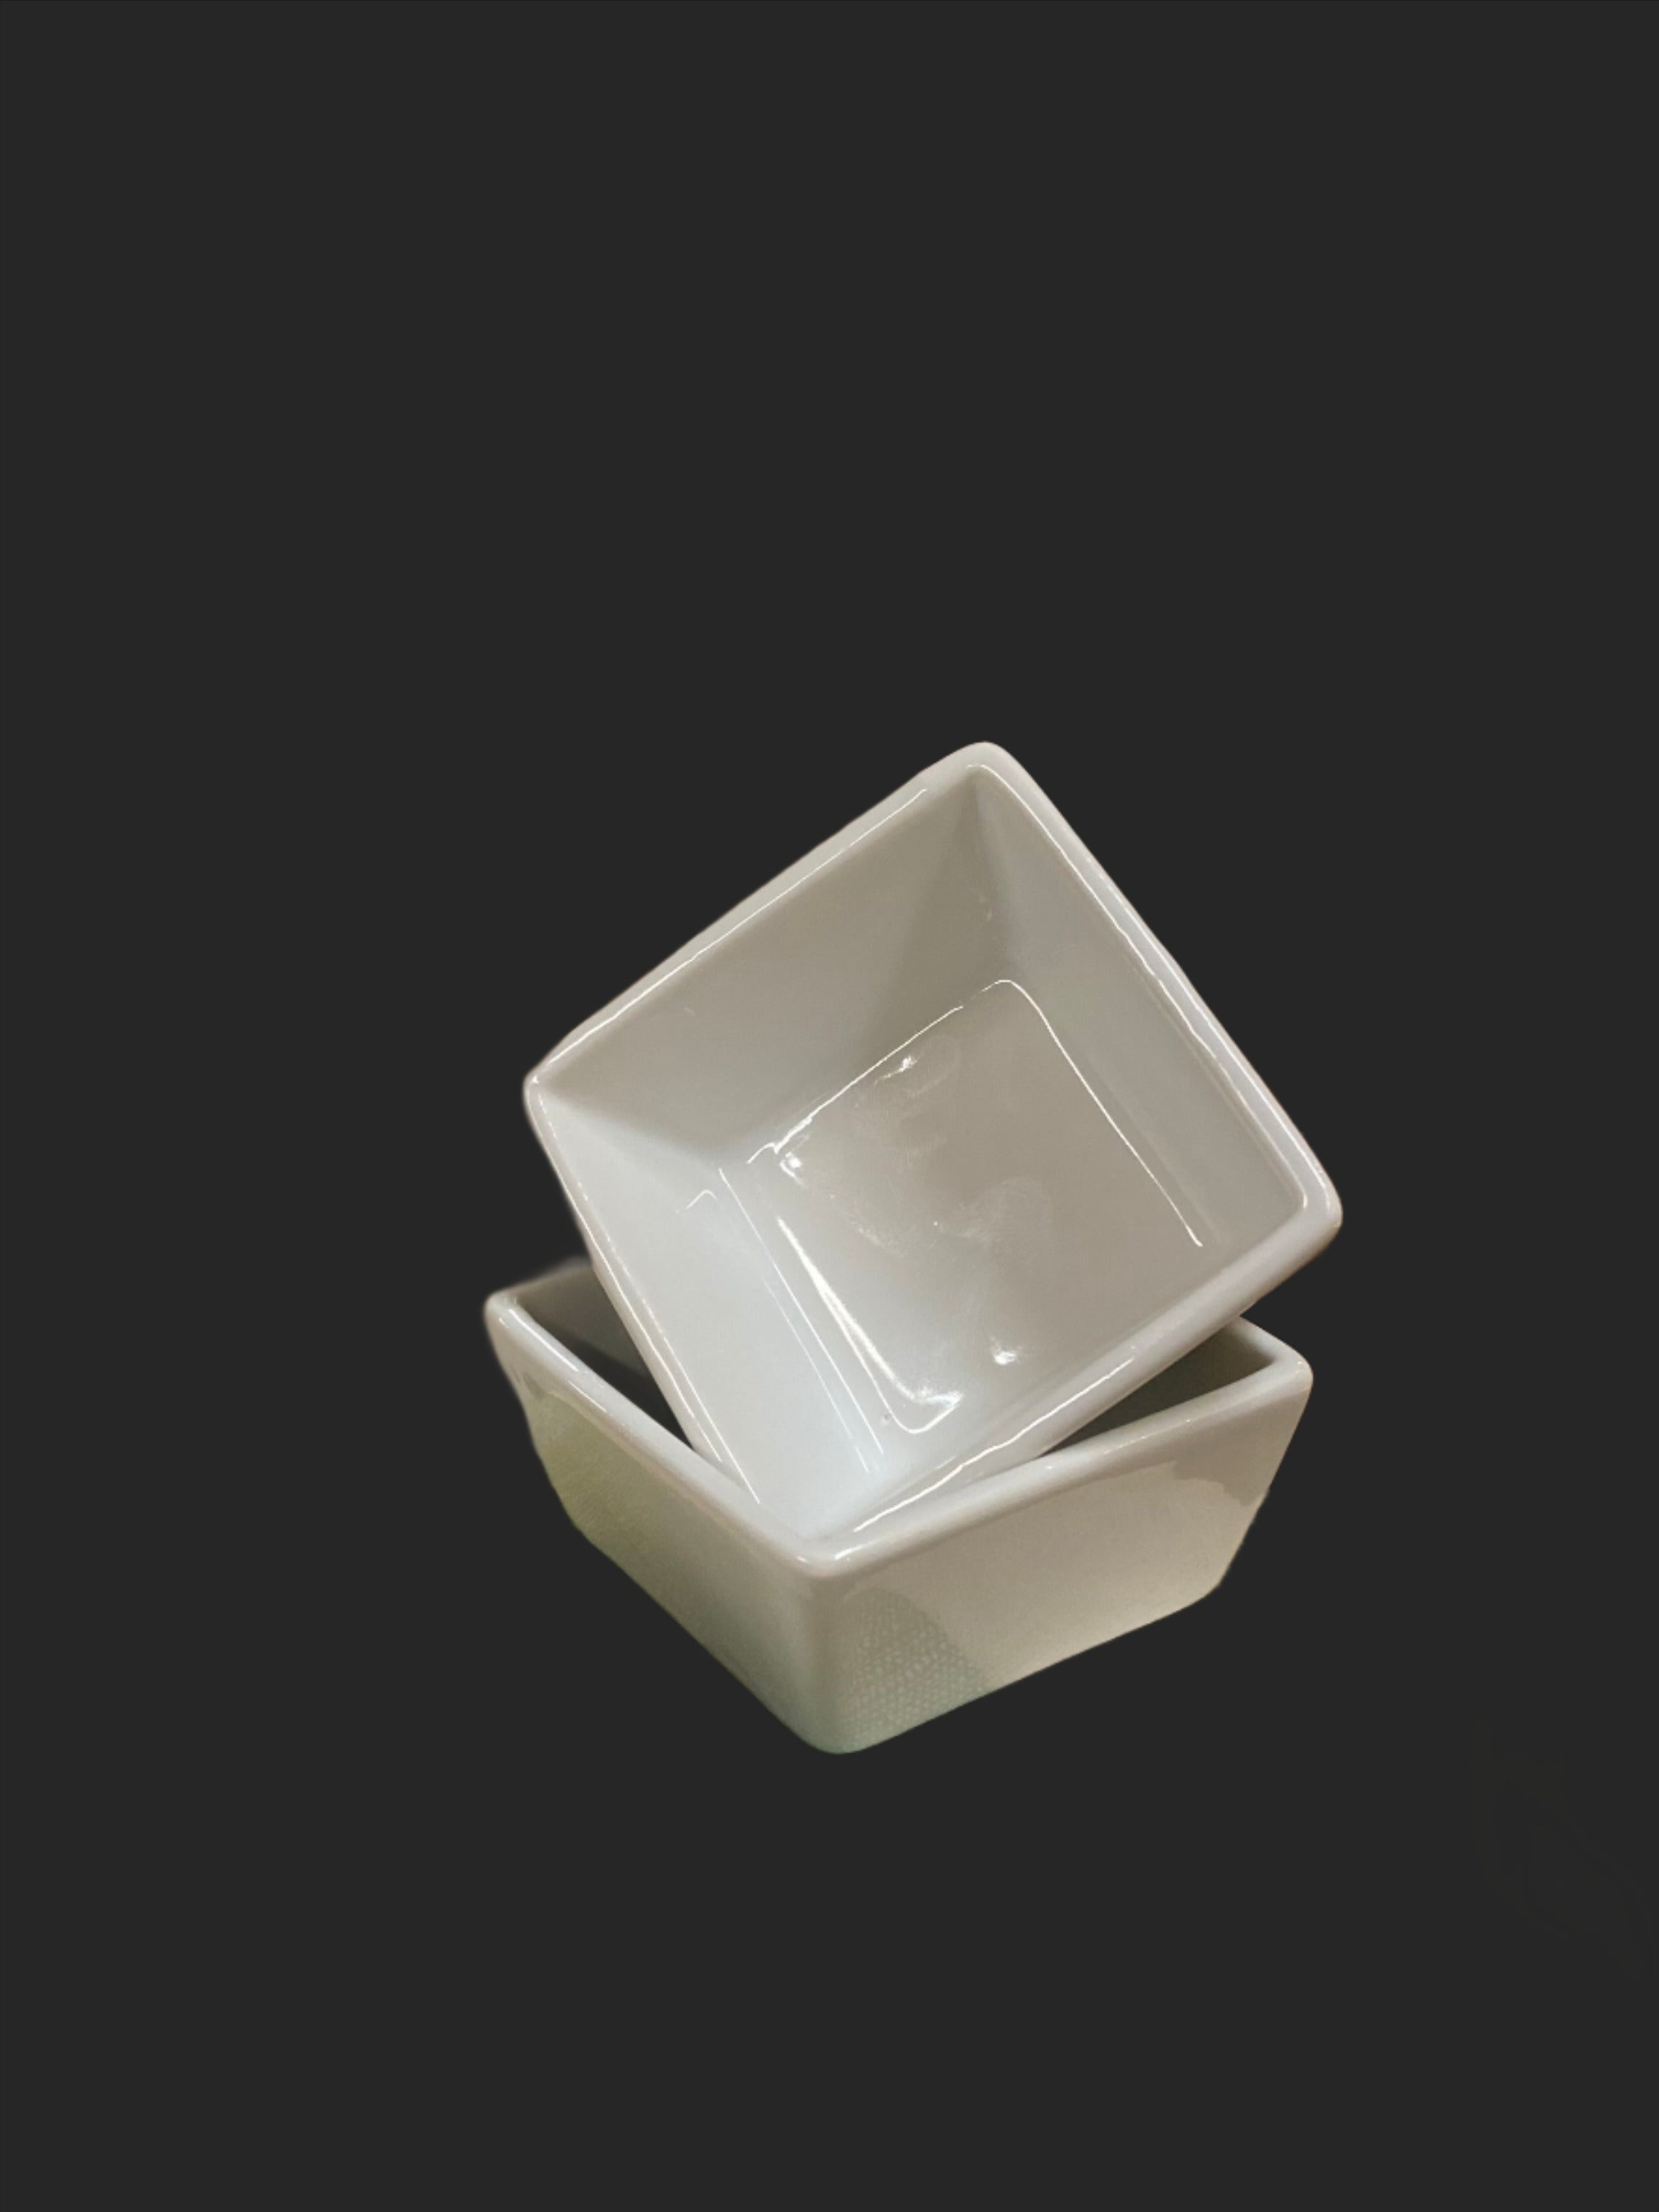 White Square Dipping Dish - 3 in - Olive Oil Etcetera 